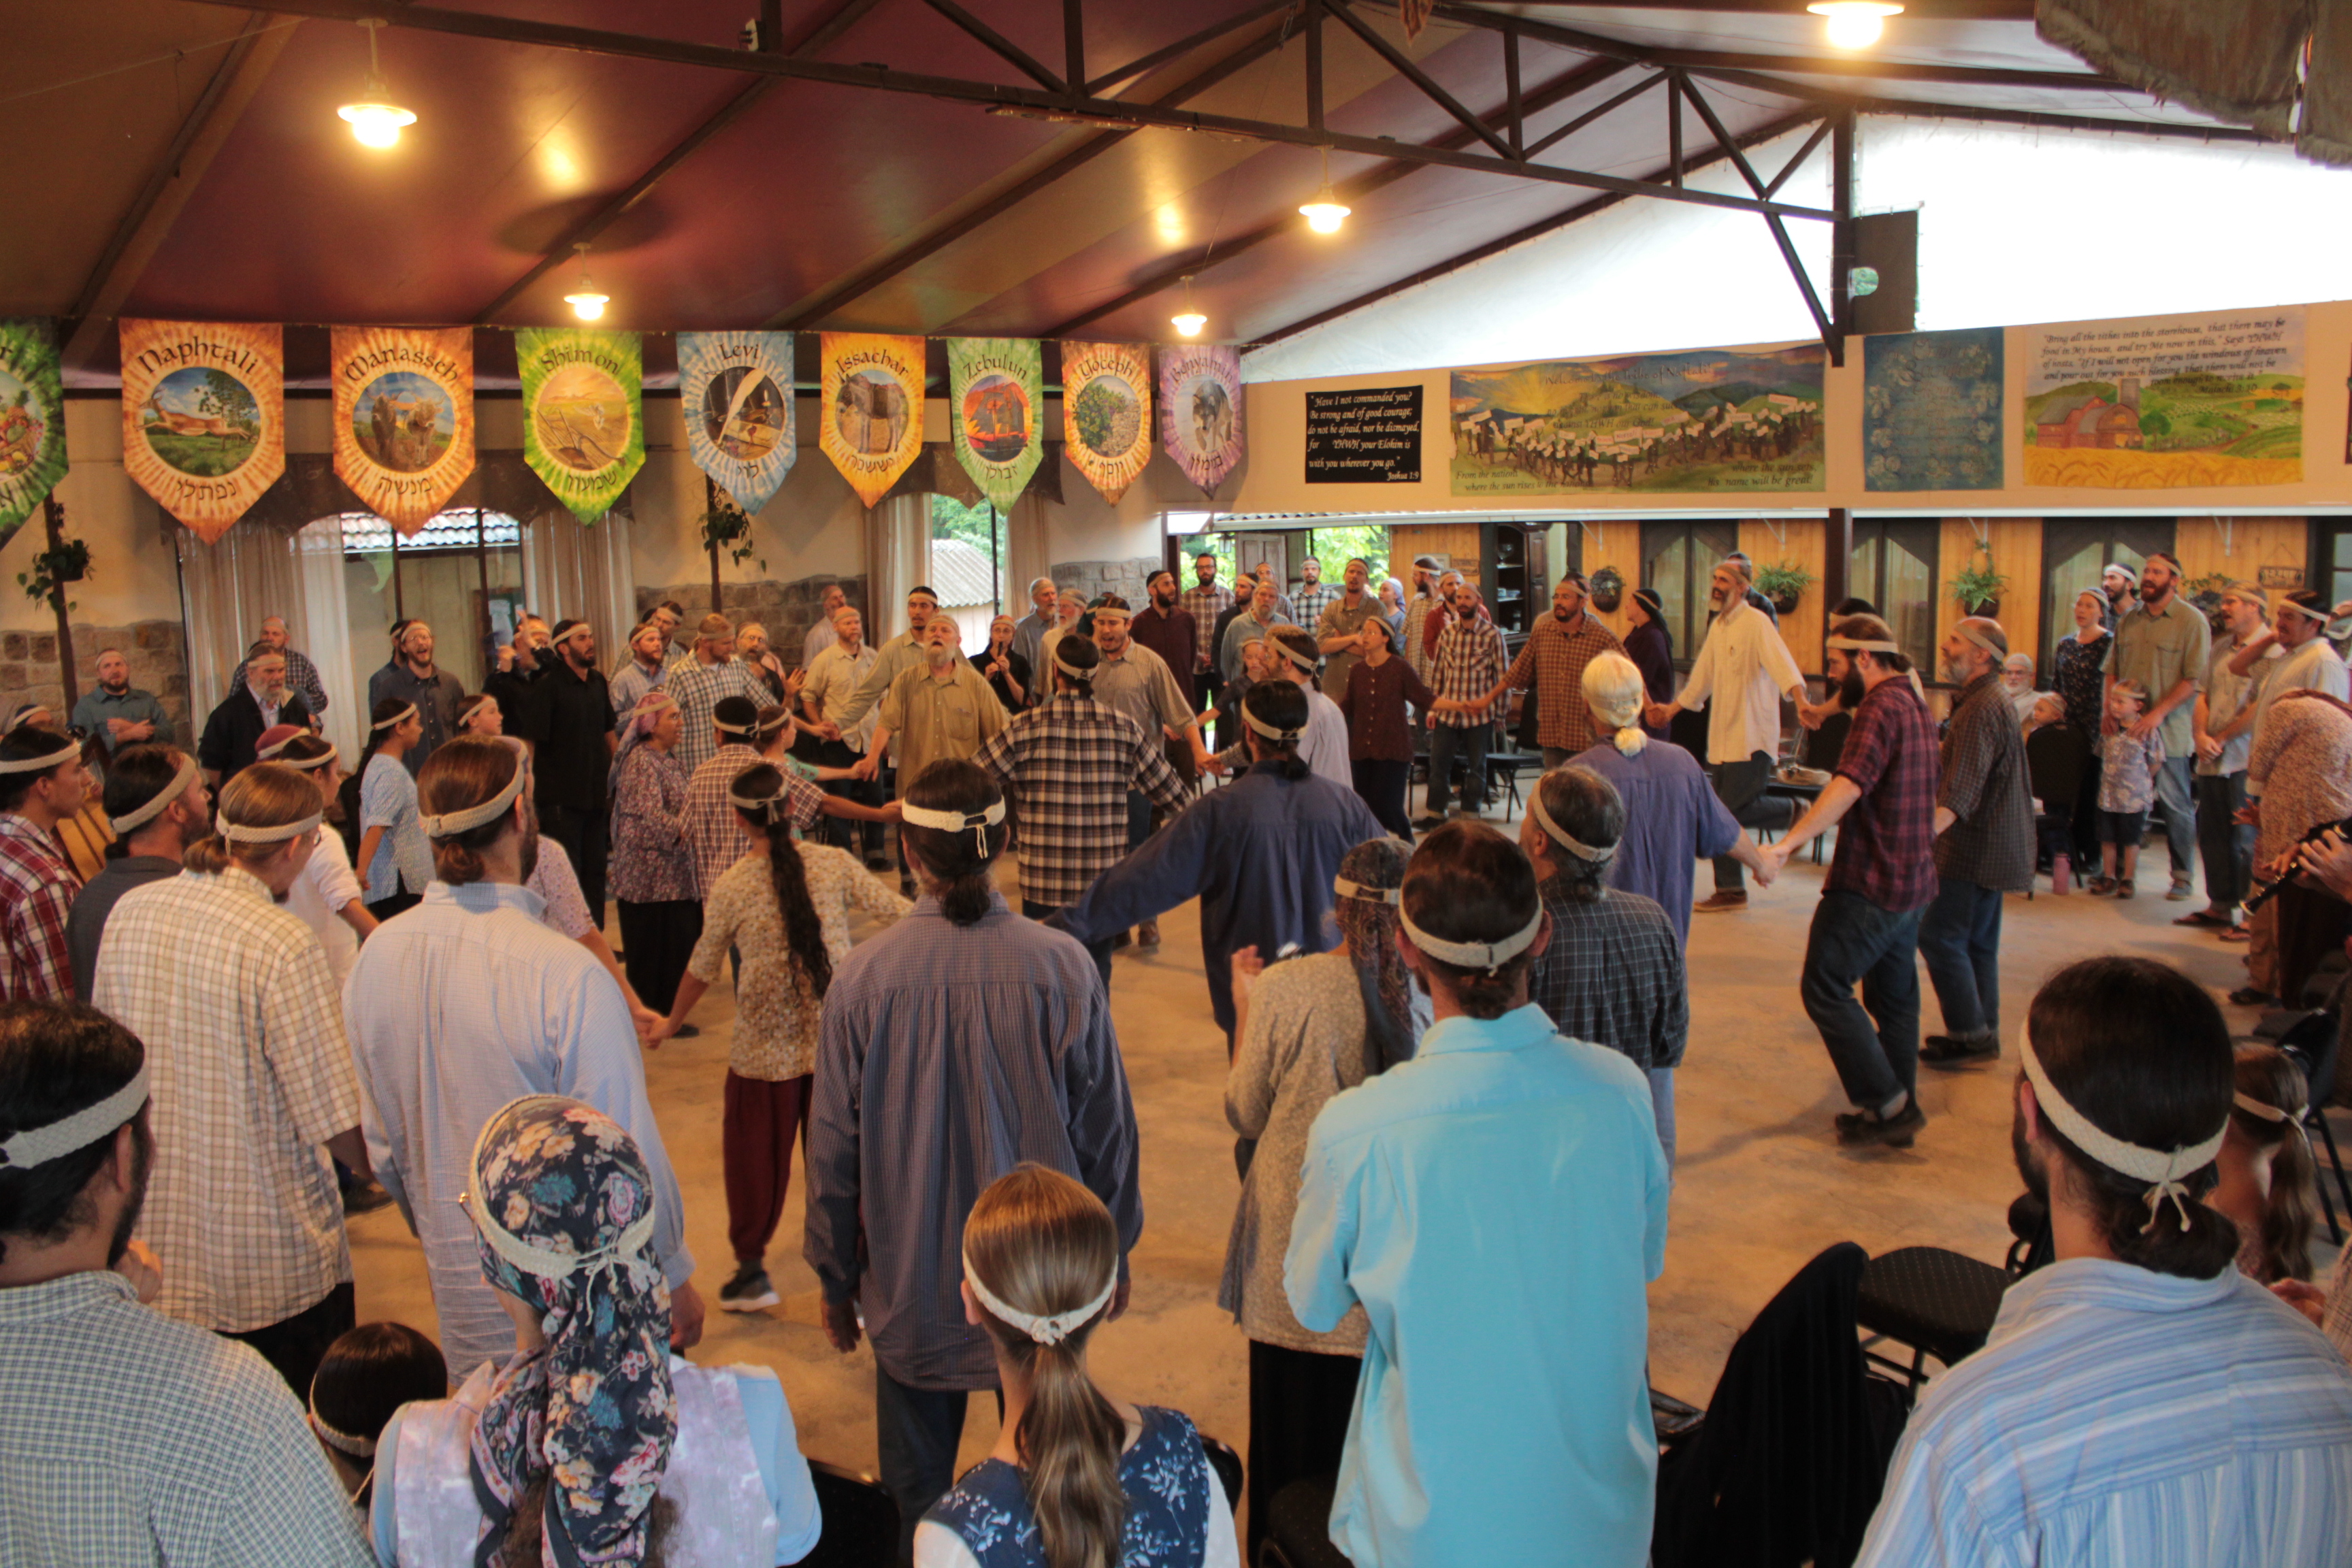 Dancing in one of our gatherings.